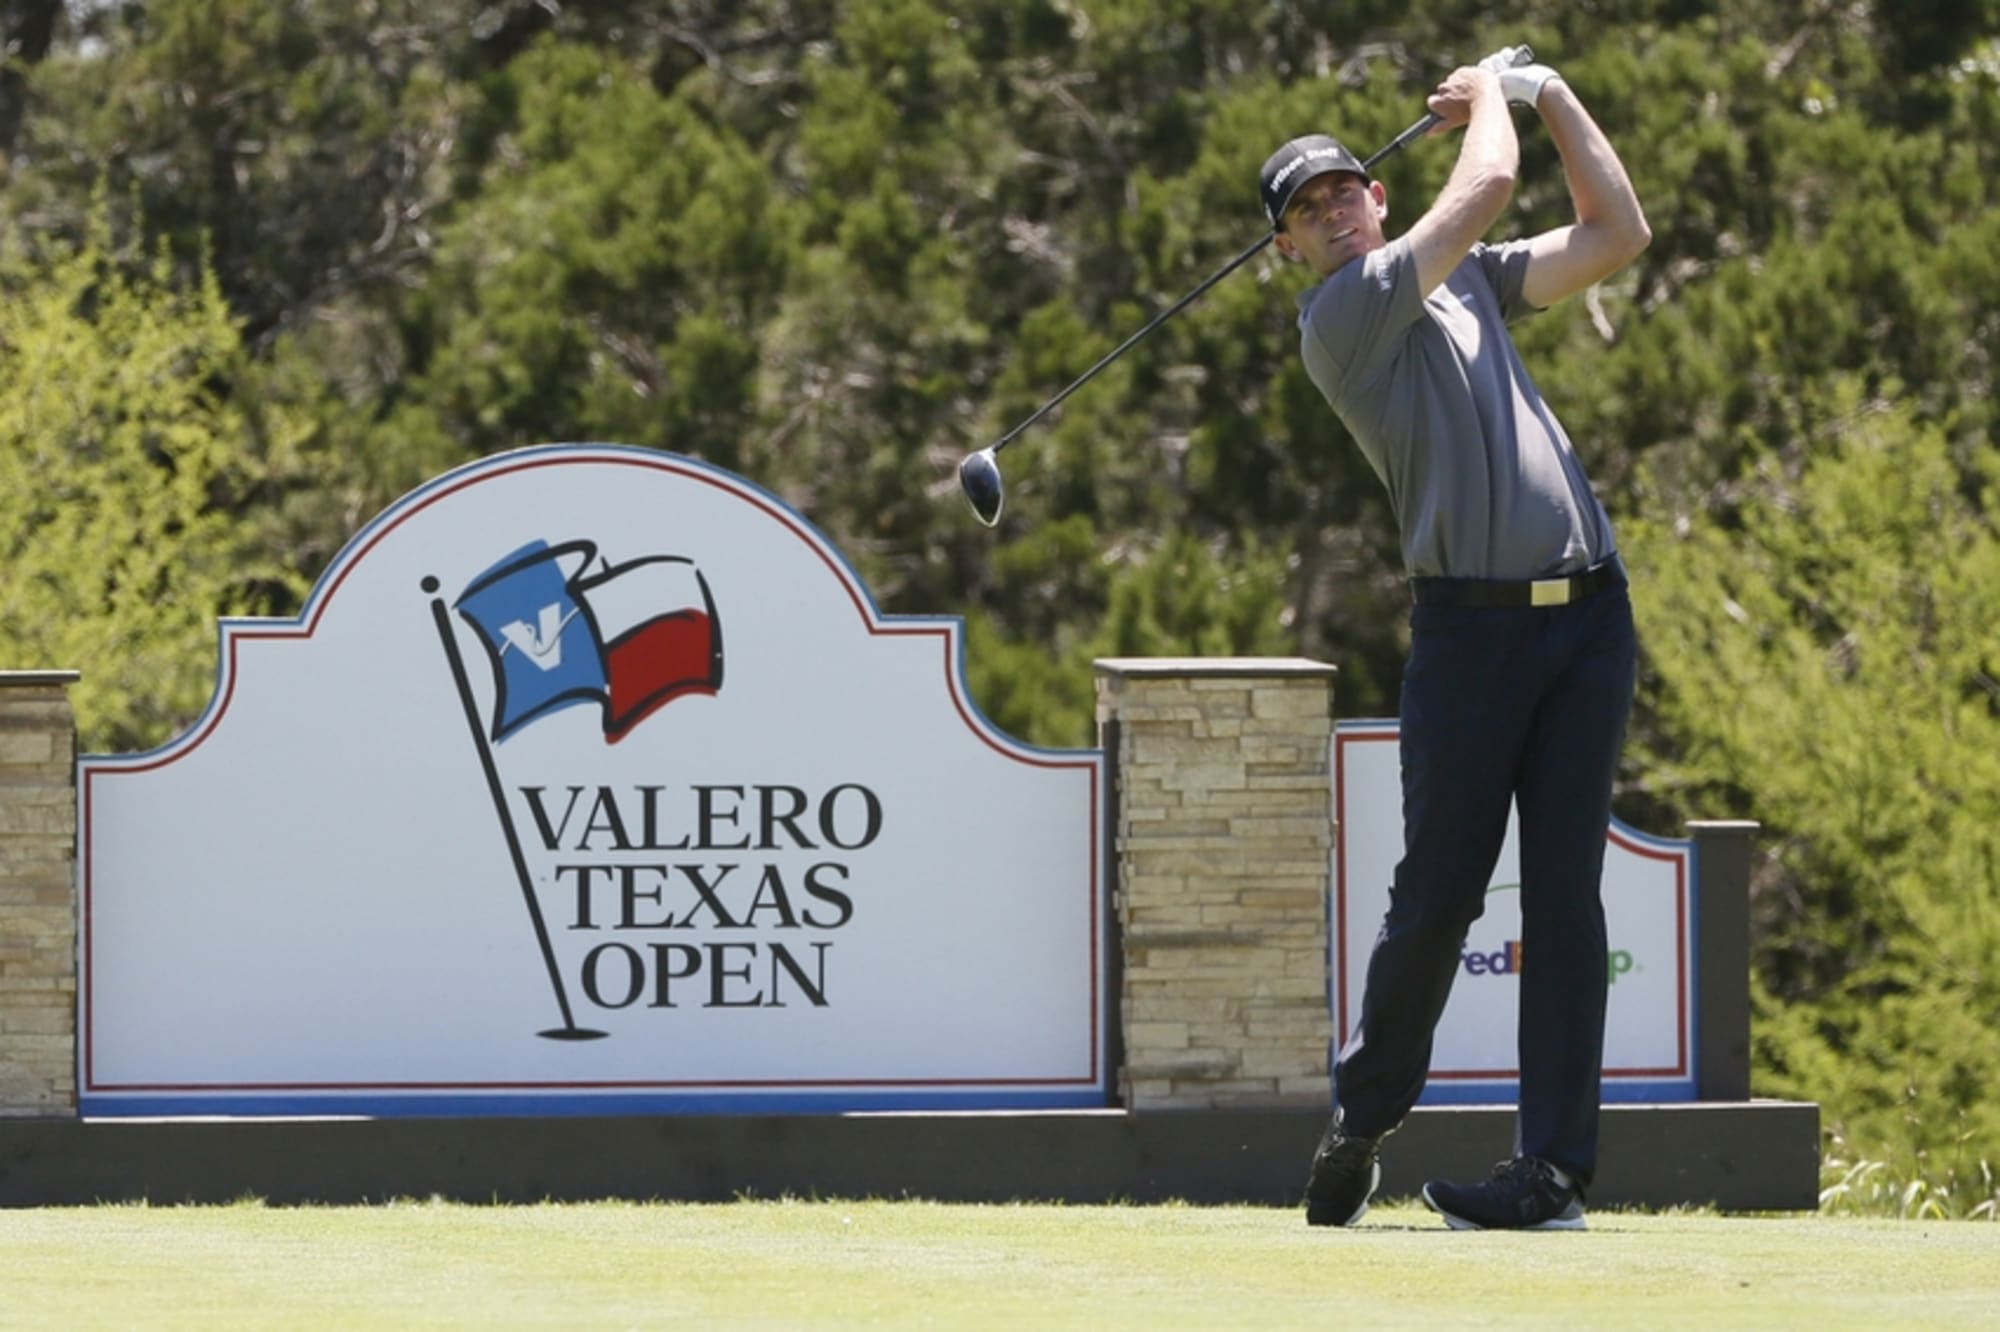 Valero Texas Open 36 Hole Recap and Weekend Preview